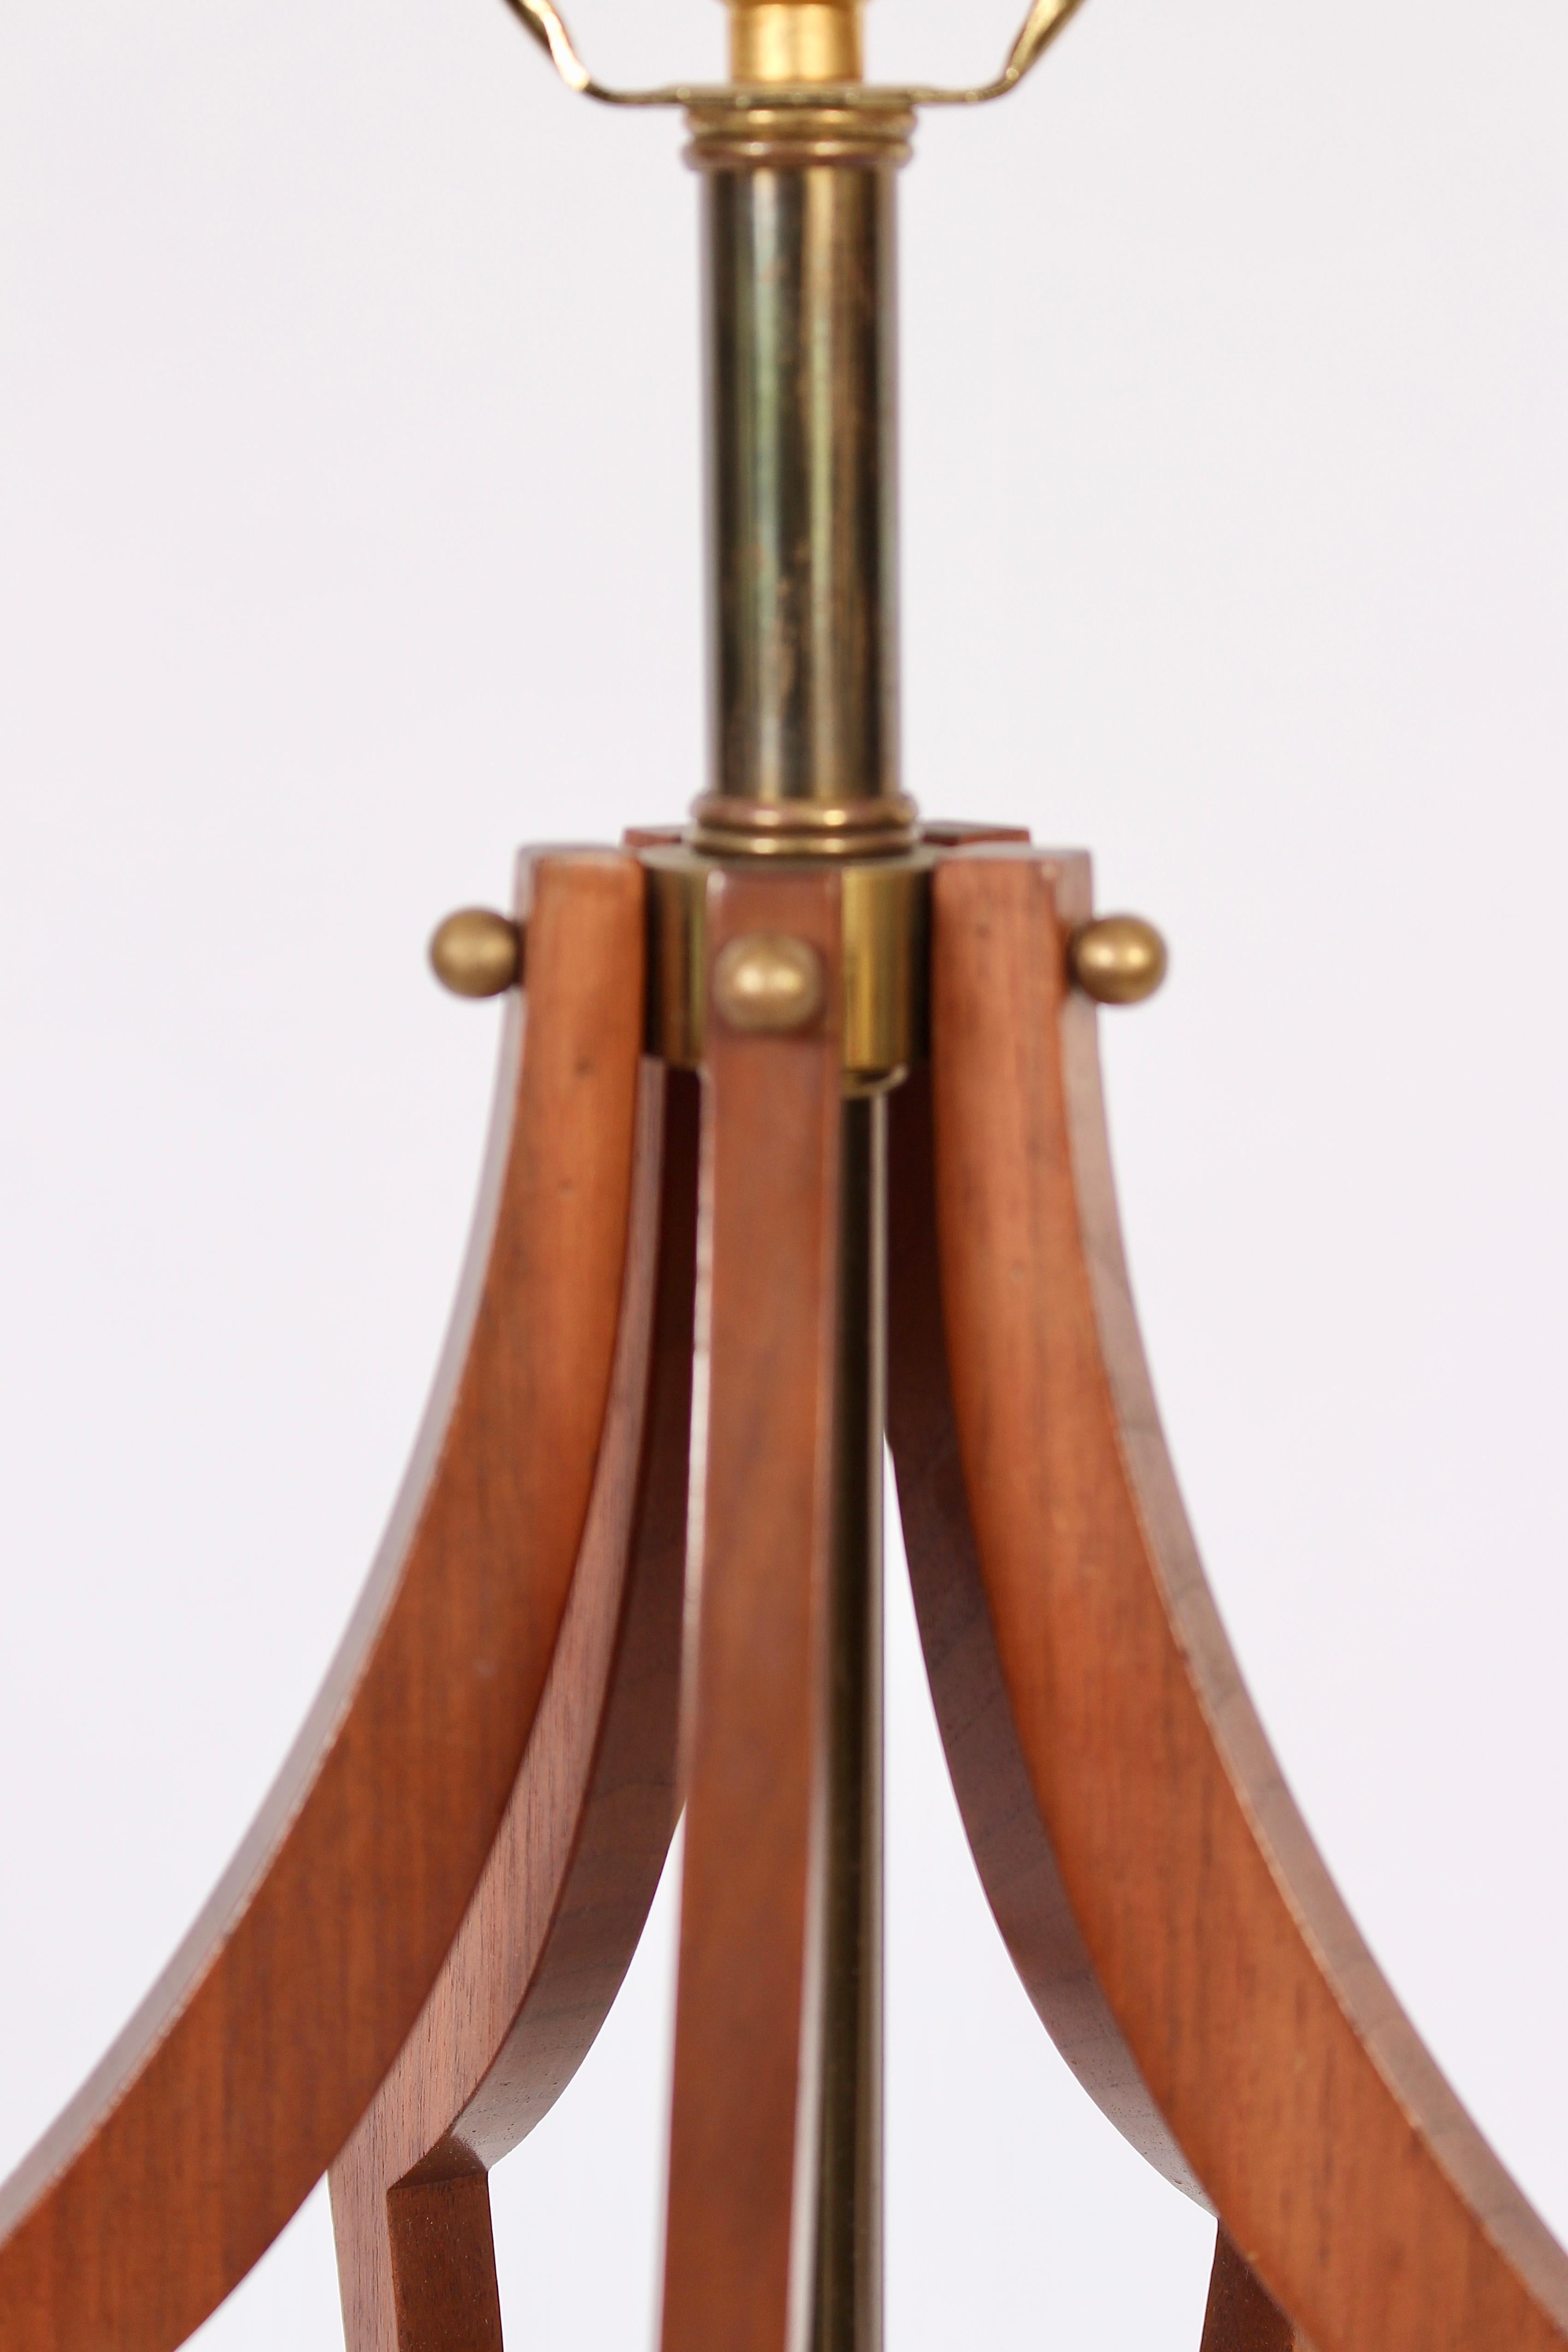 Plated Monumental American Mid Century Geometric Cut Out Walnut Table Lamp, circa 1960 For Sale